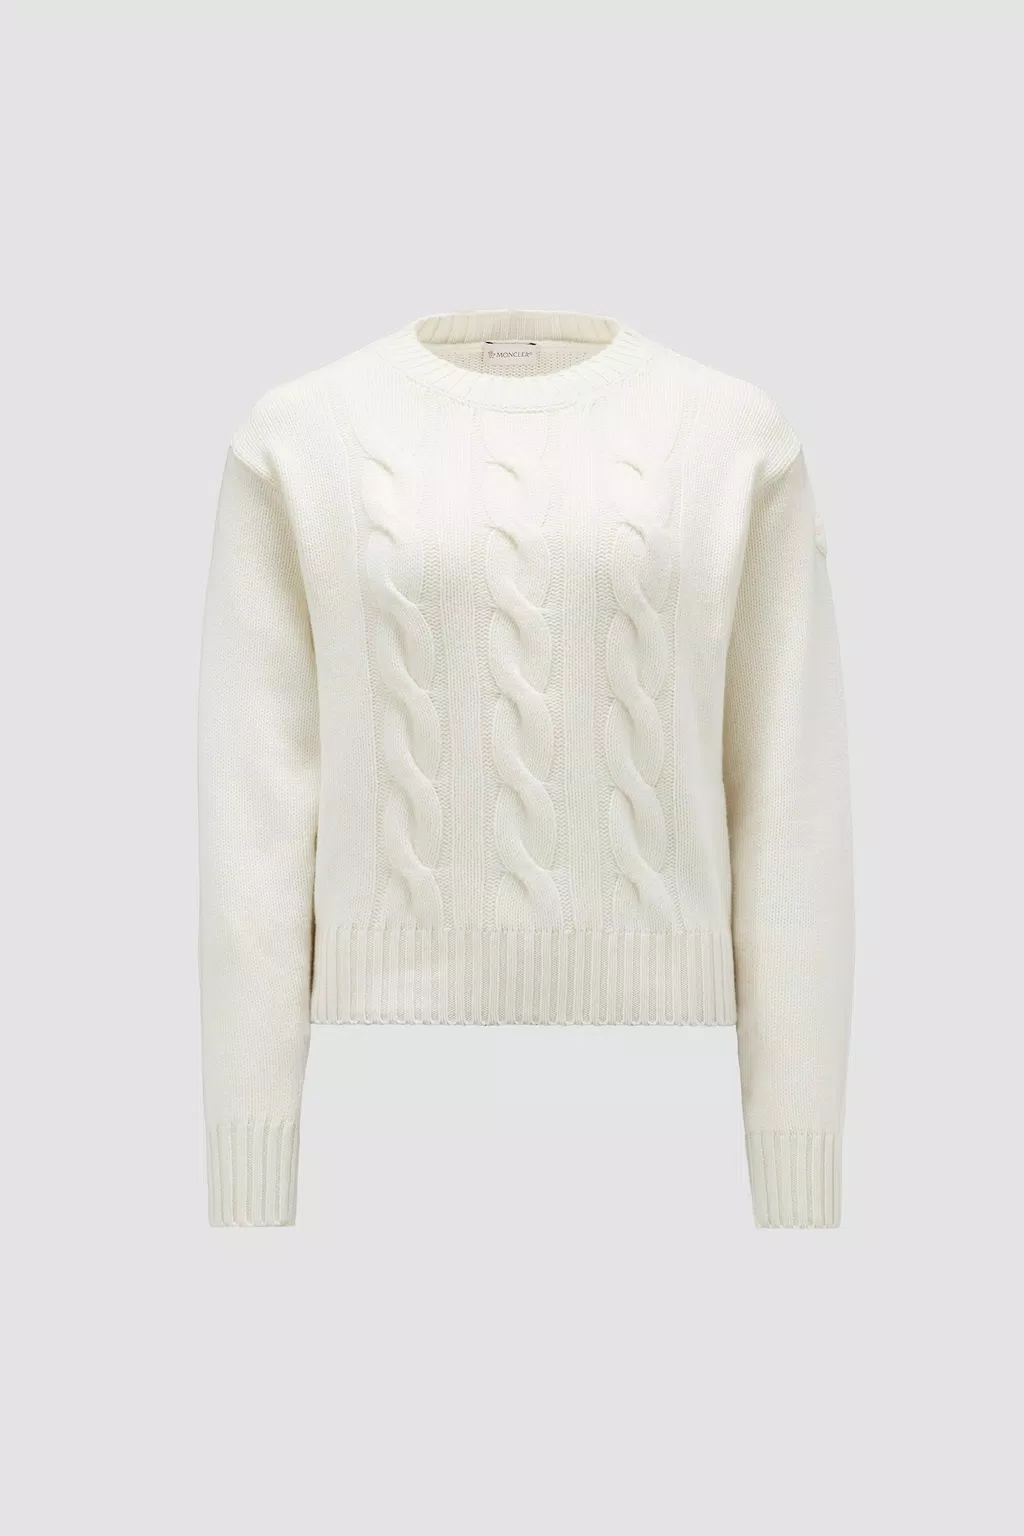 Off White Cable Knit Cashmere Sweater - Sweaters & Cardigans for Women ...